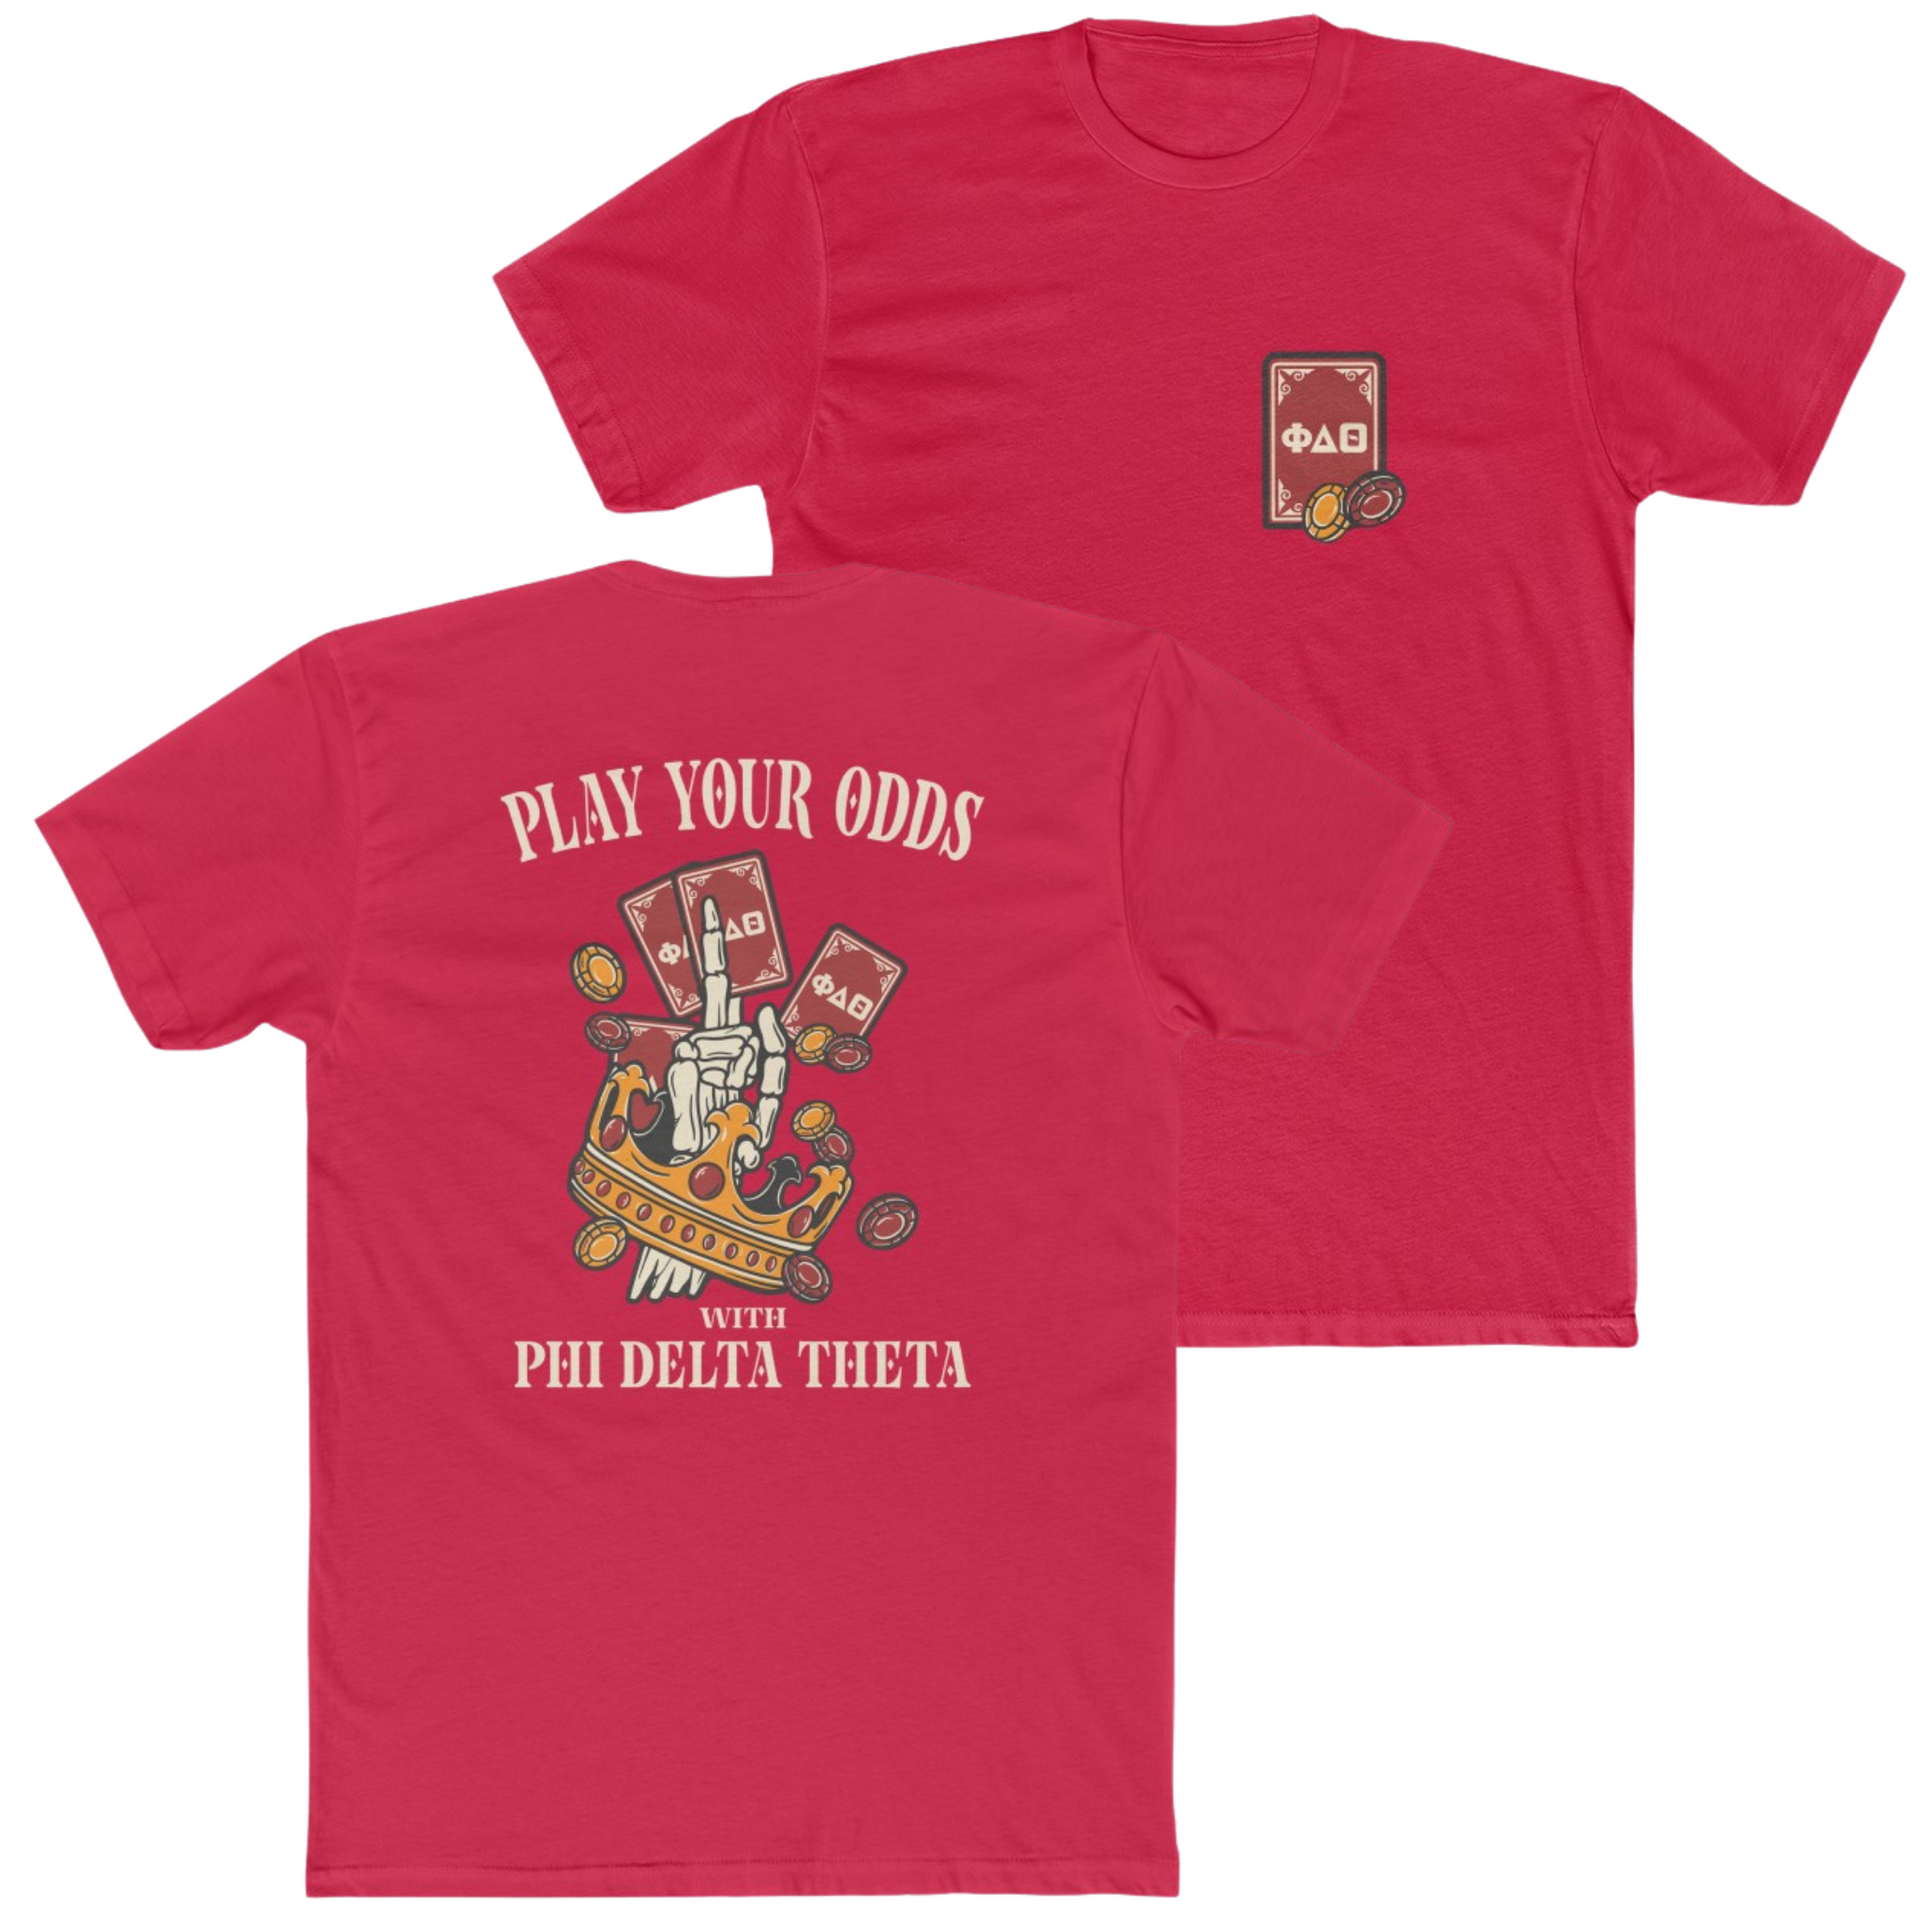 Red Phi Delta Theta Graphic T-Shirt | Play Your Odds | phi delta theta fraternity greek apparel 